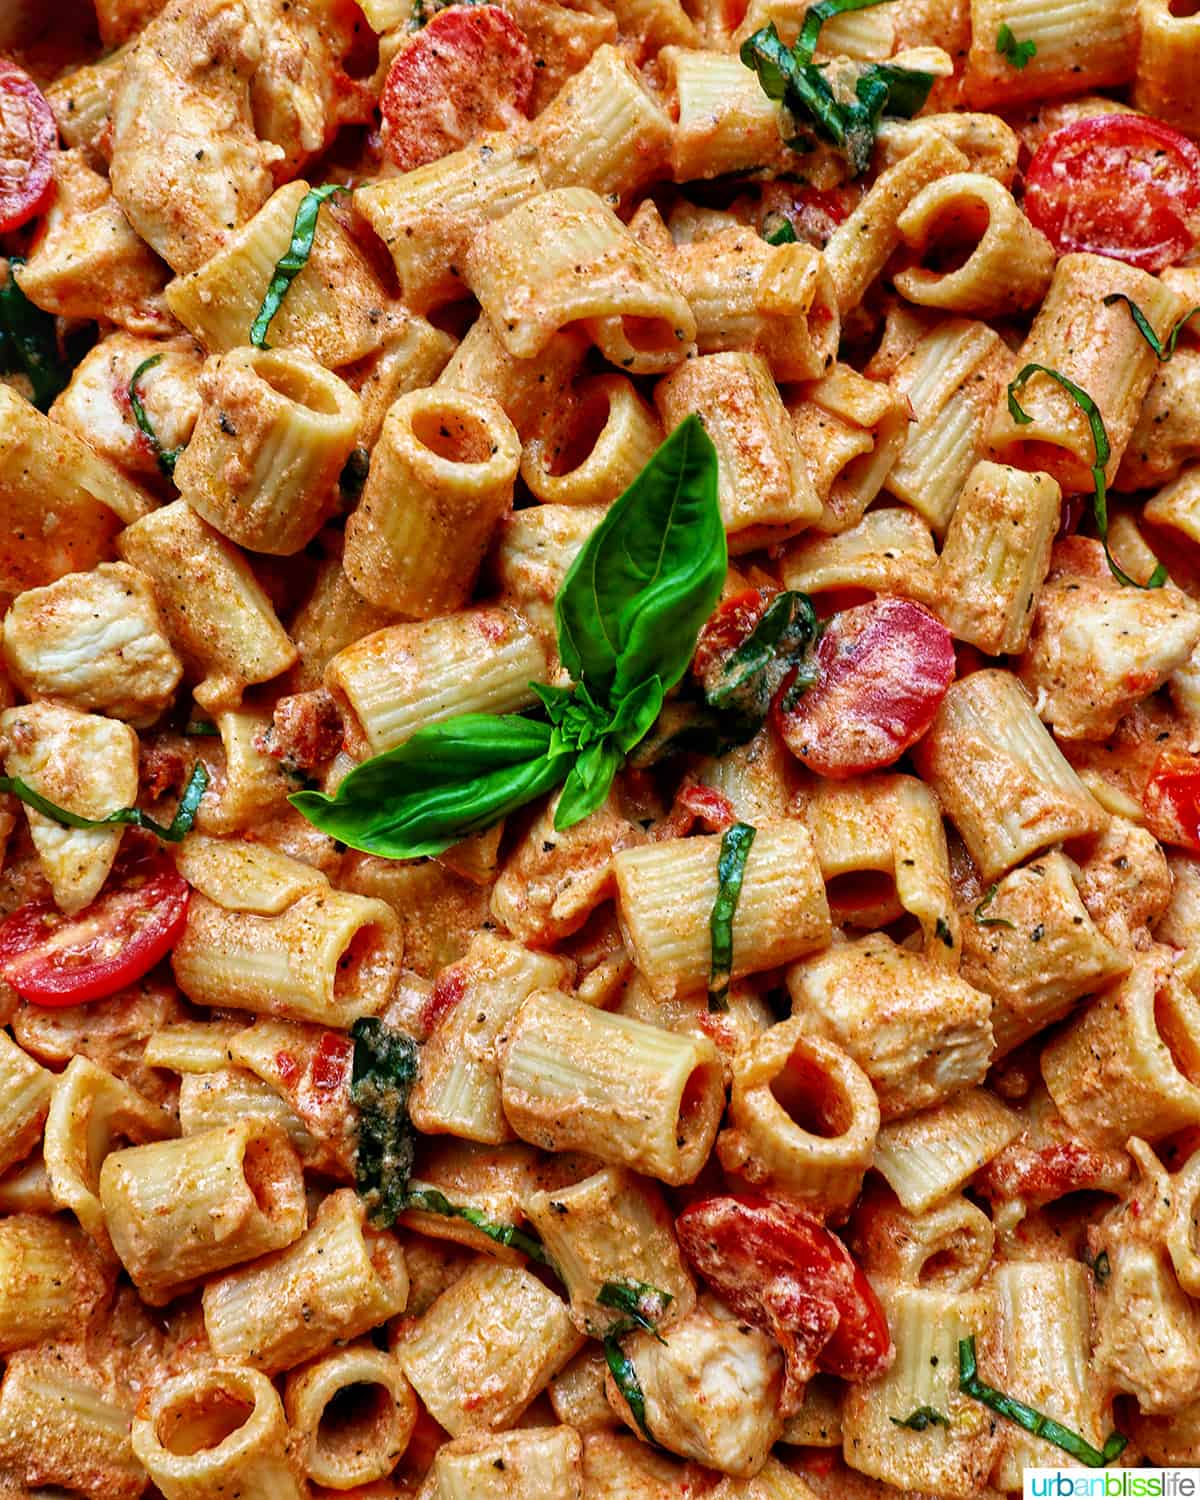 rigatoni pasta in a creamy Tuscan sauce with chicken, tomatoes, and herbs.